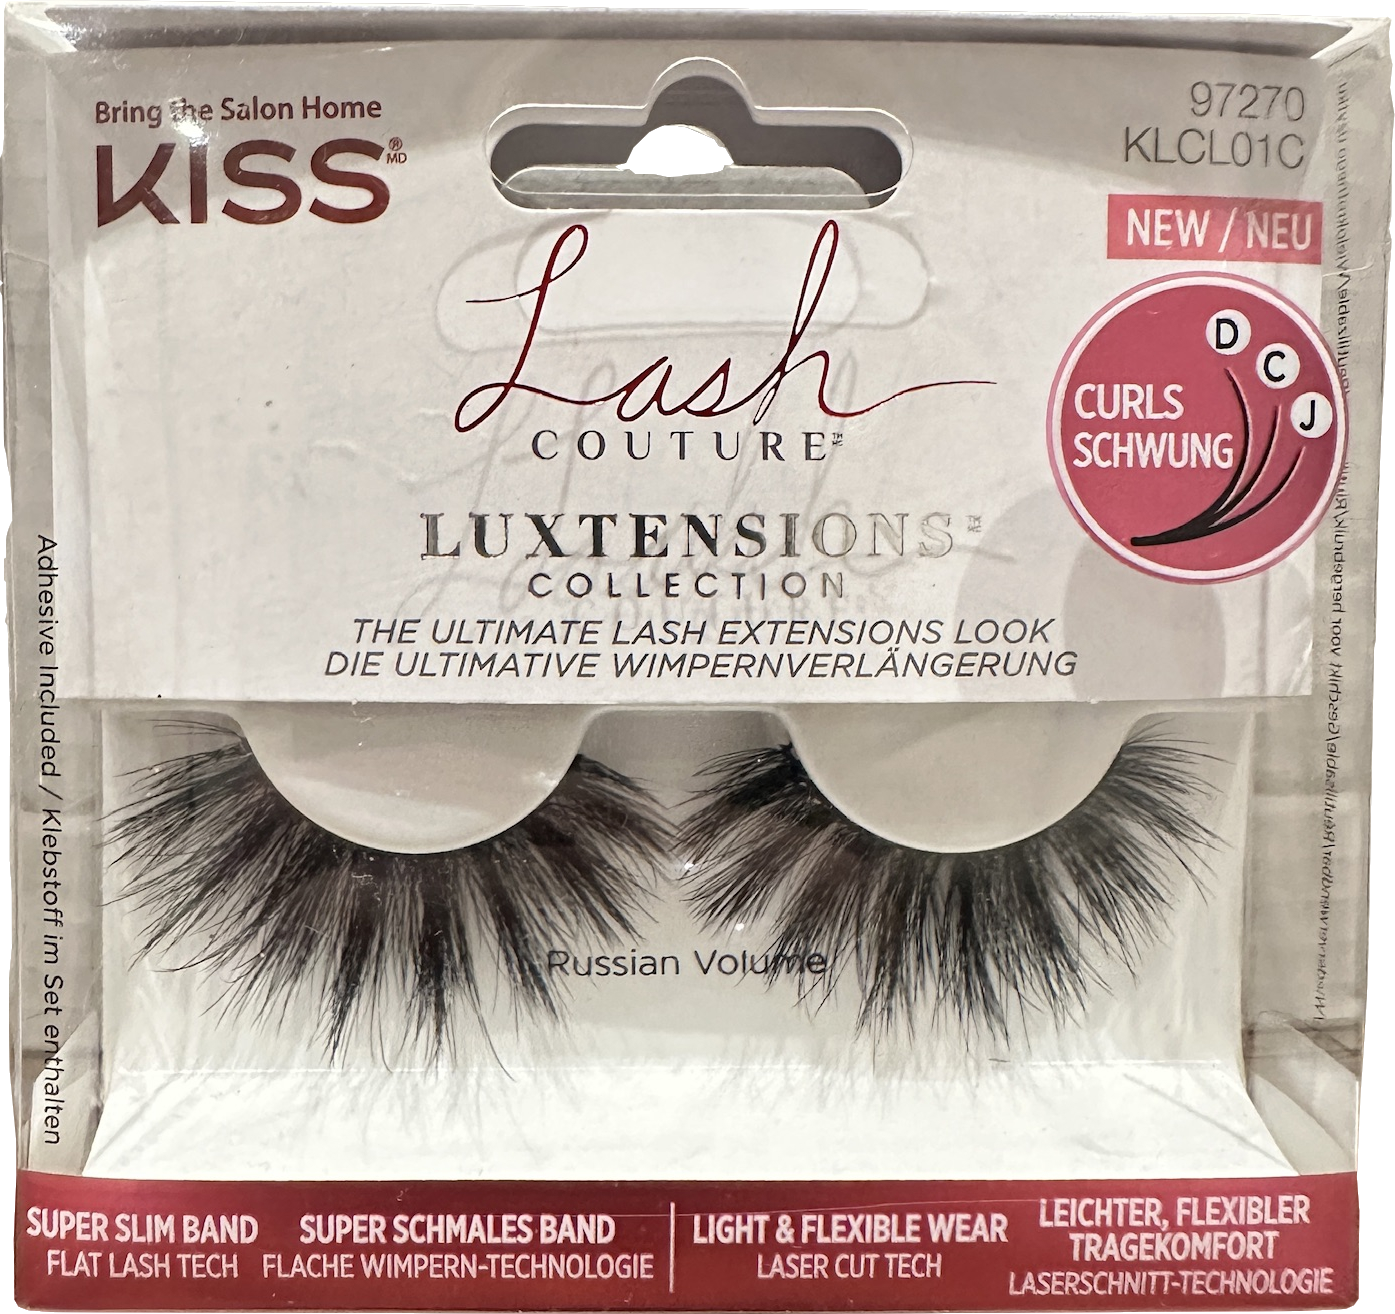 kiss Lach Couture Luxtensions Russian Volume one pair